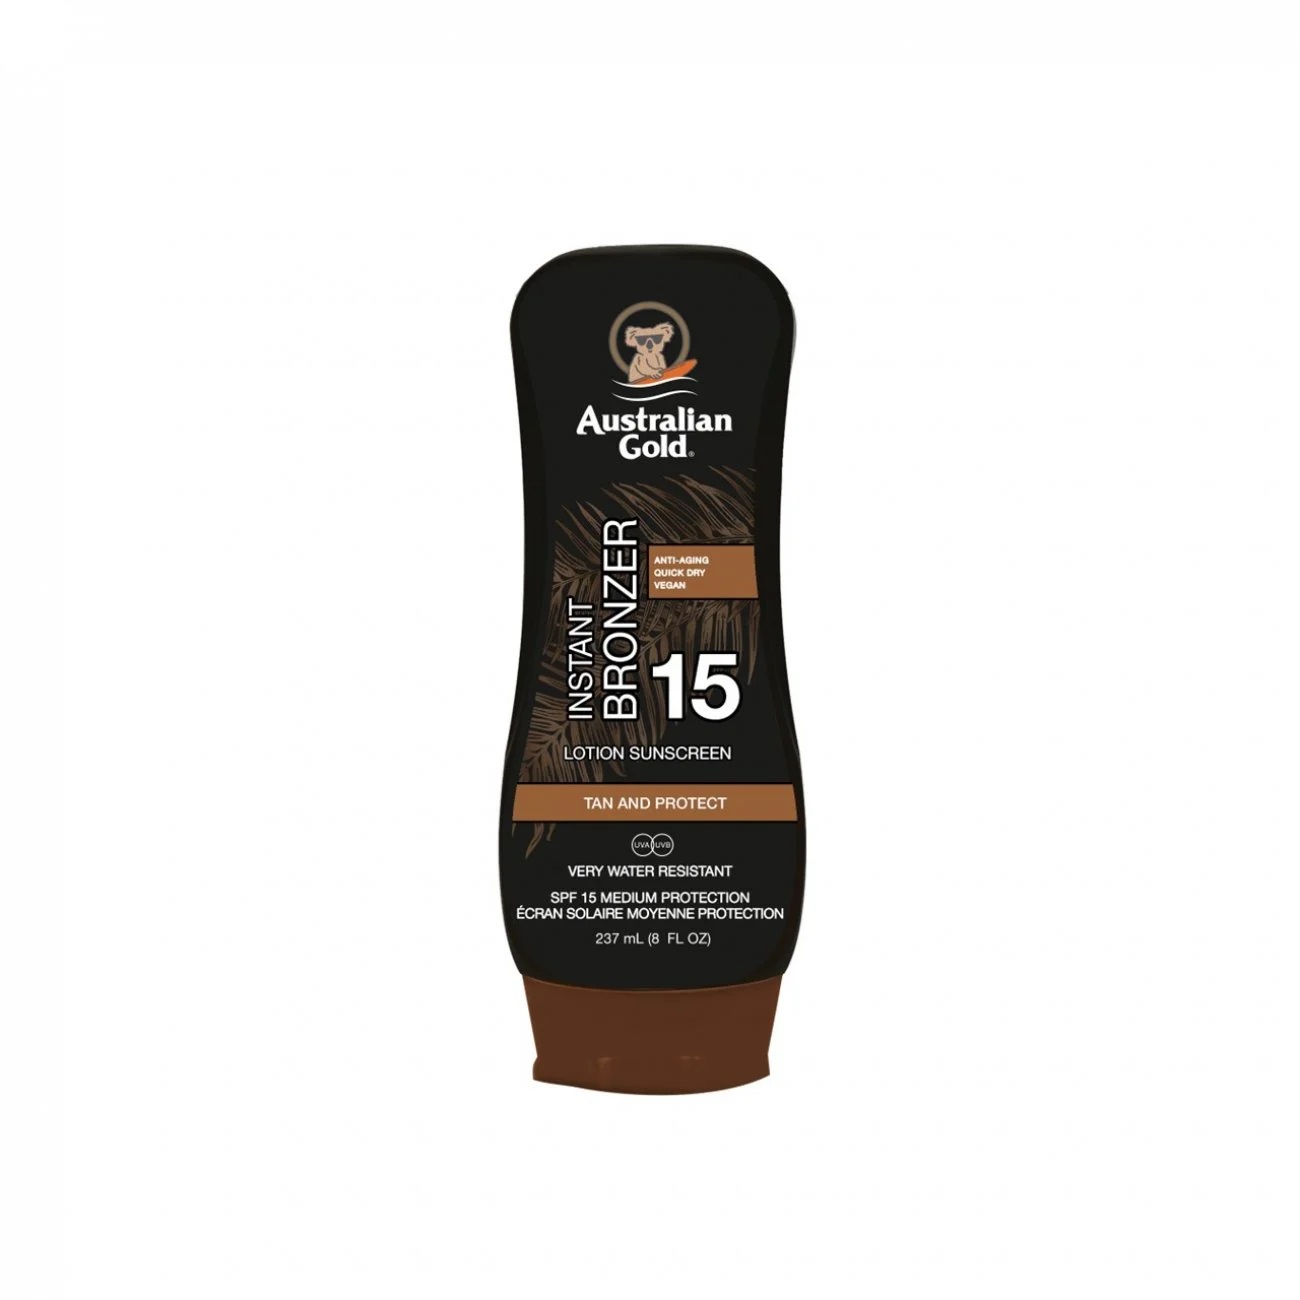 Instant Bronzer Lotion Sunscreen Tan and Protect 237ml